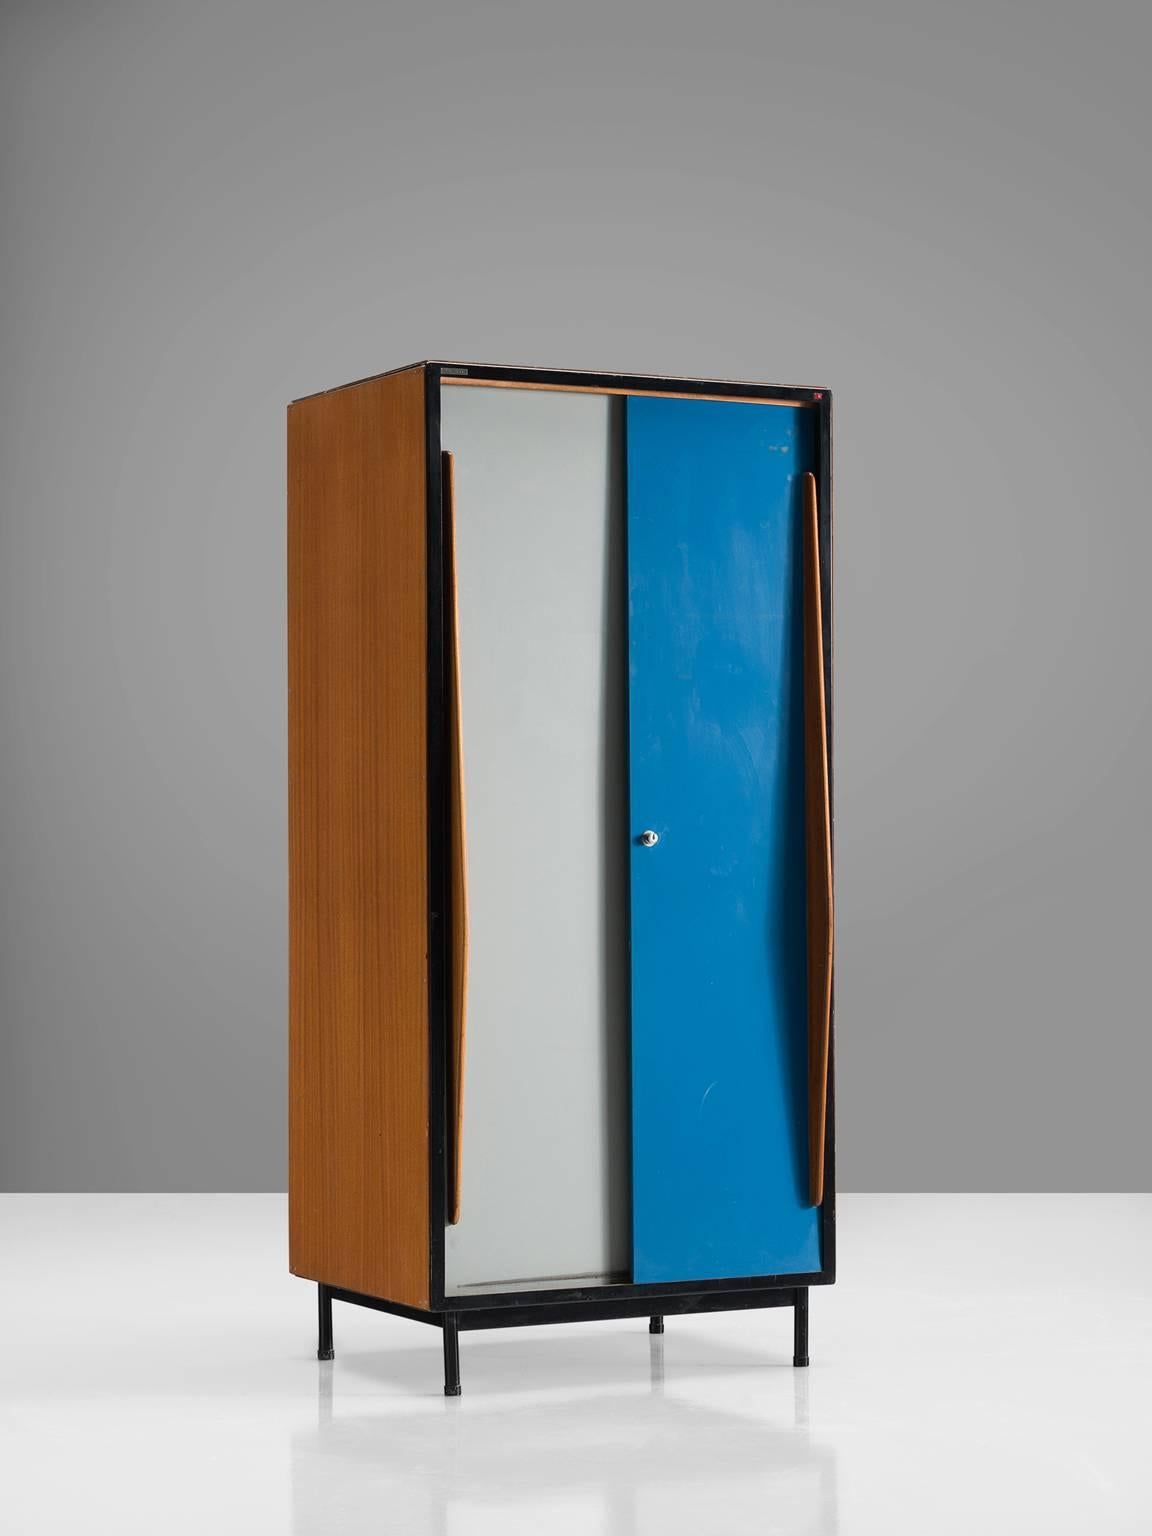 Willy Van Der Meeren for Tubax, cabinet, in wood, mahogany and metal, Belgium, design 1952. 

Nice early example of Industrial Design from the Belgium modernist stream, designed by Willy Van Der Meeren. Originally designed for use in school